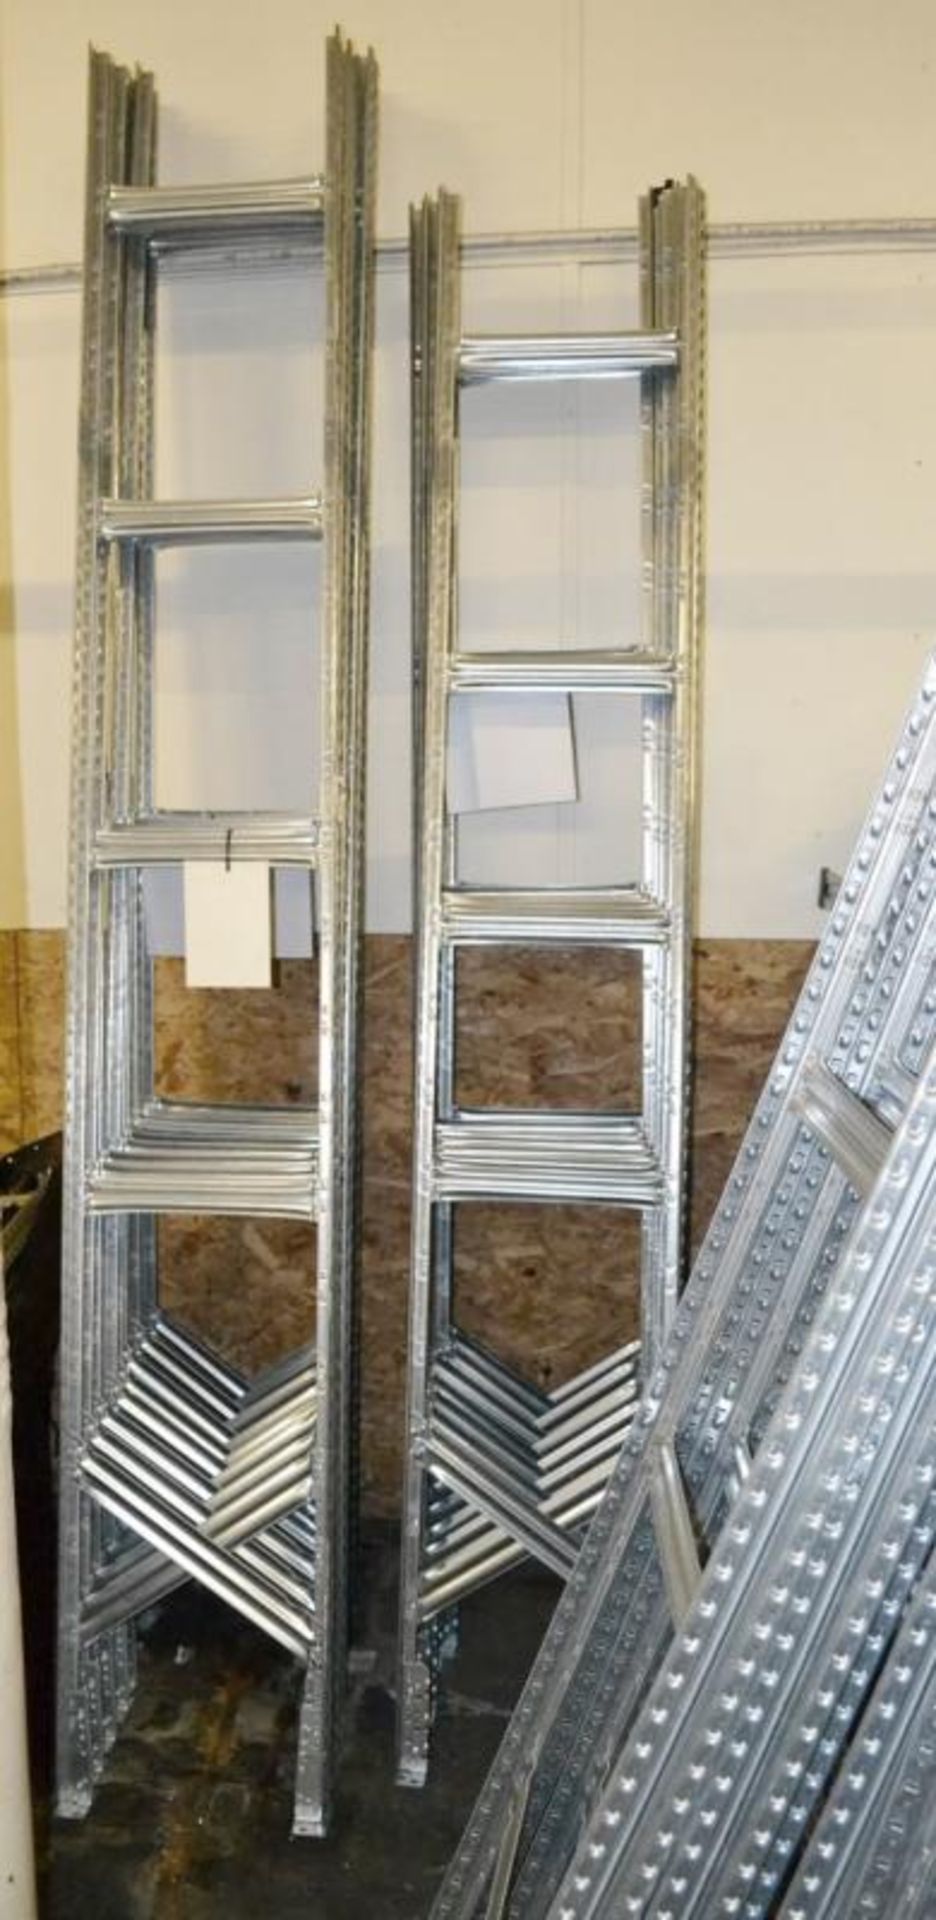 4 x Bays of Metalsistem Steel Modular Storage Shelving - Includes 29 Pieces - Recently Removed - Image 3 of 17